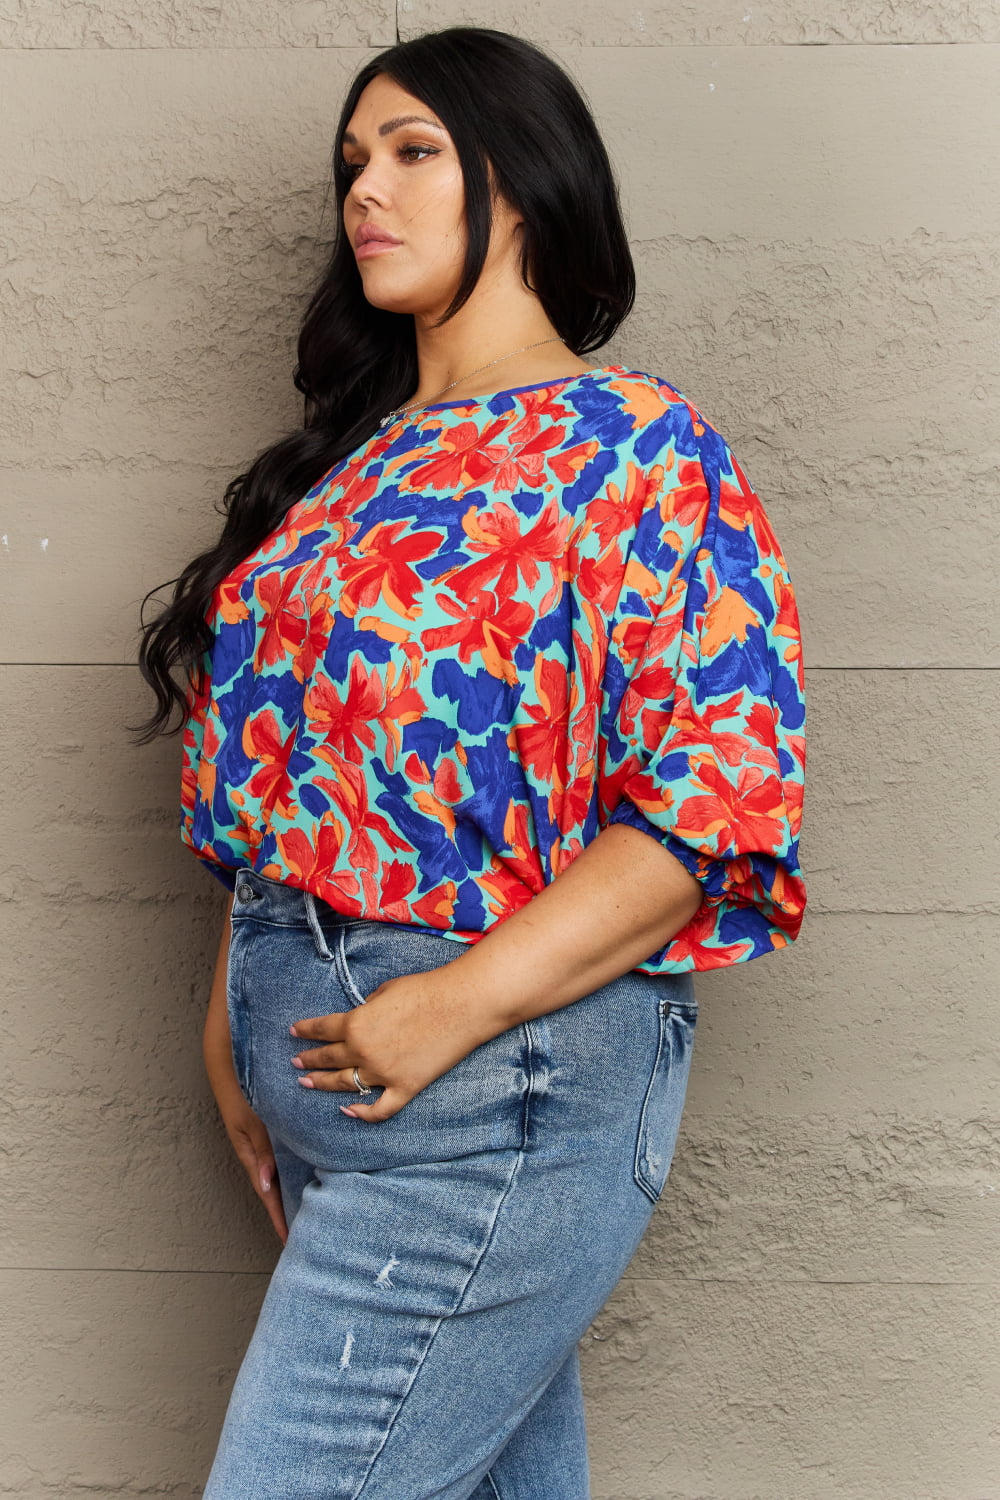 New Season Plus Size Floral Blouse - Women’s Clothing & Accessories - Shirts & Tops - 3 - 2024